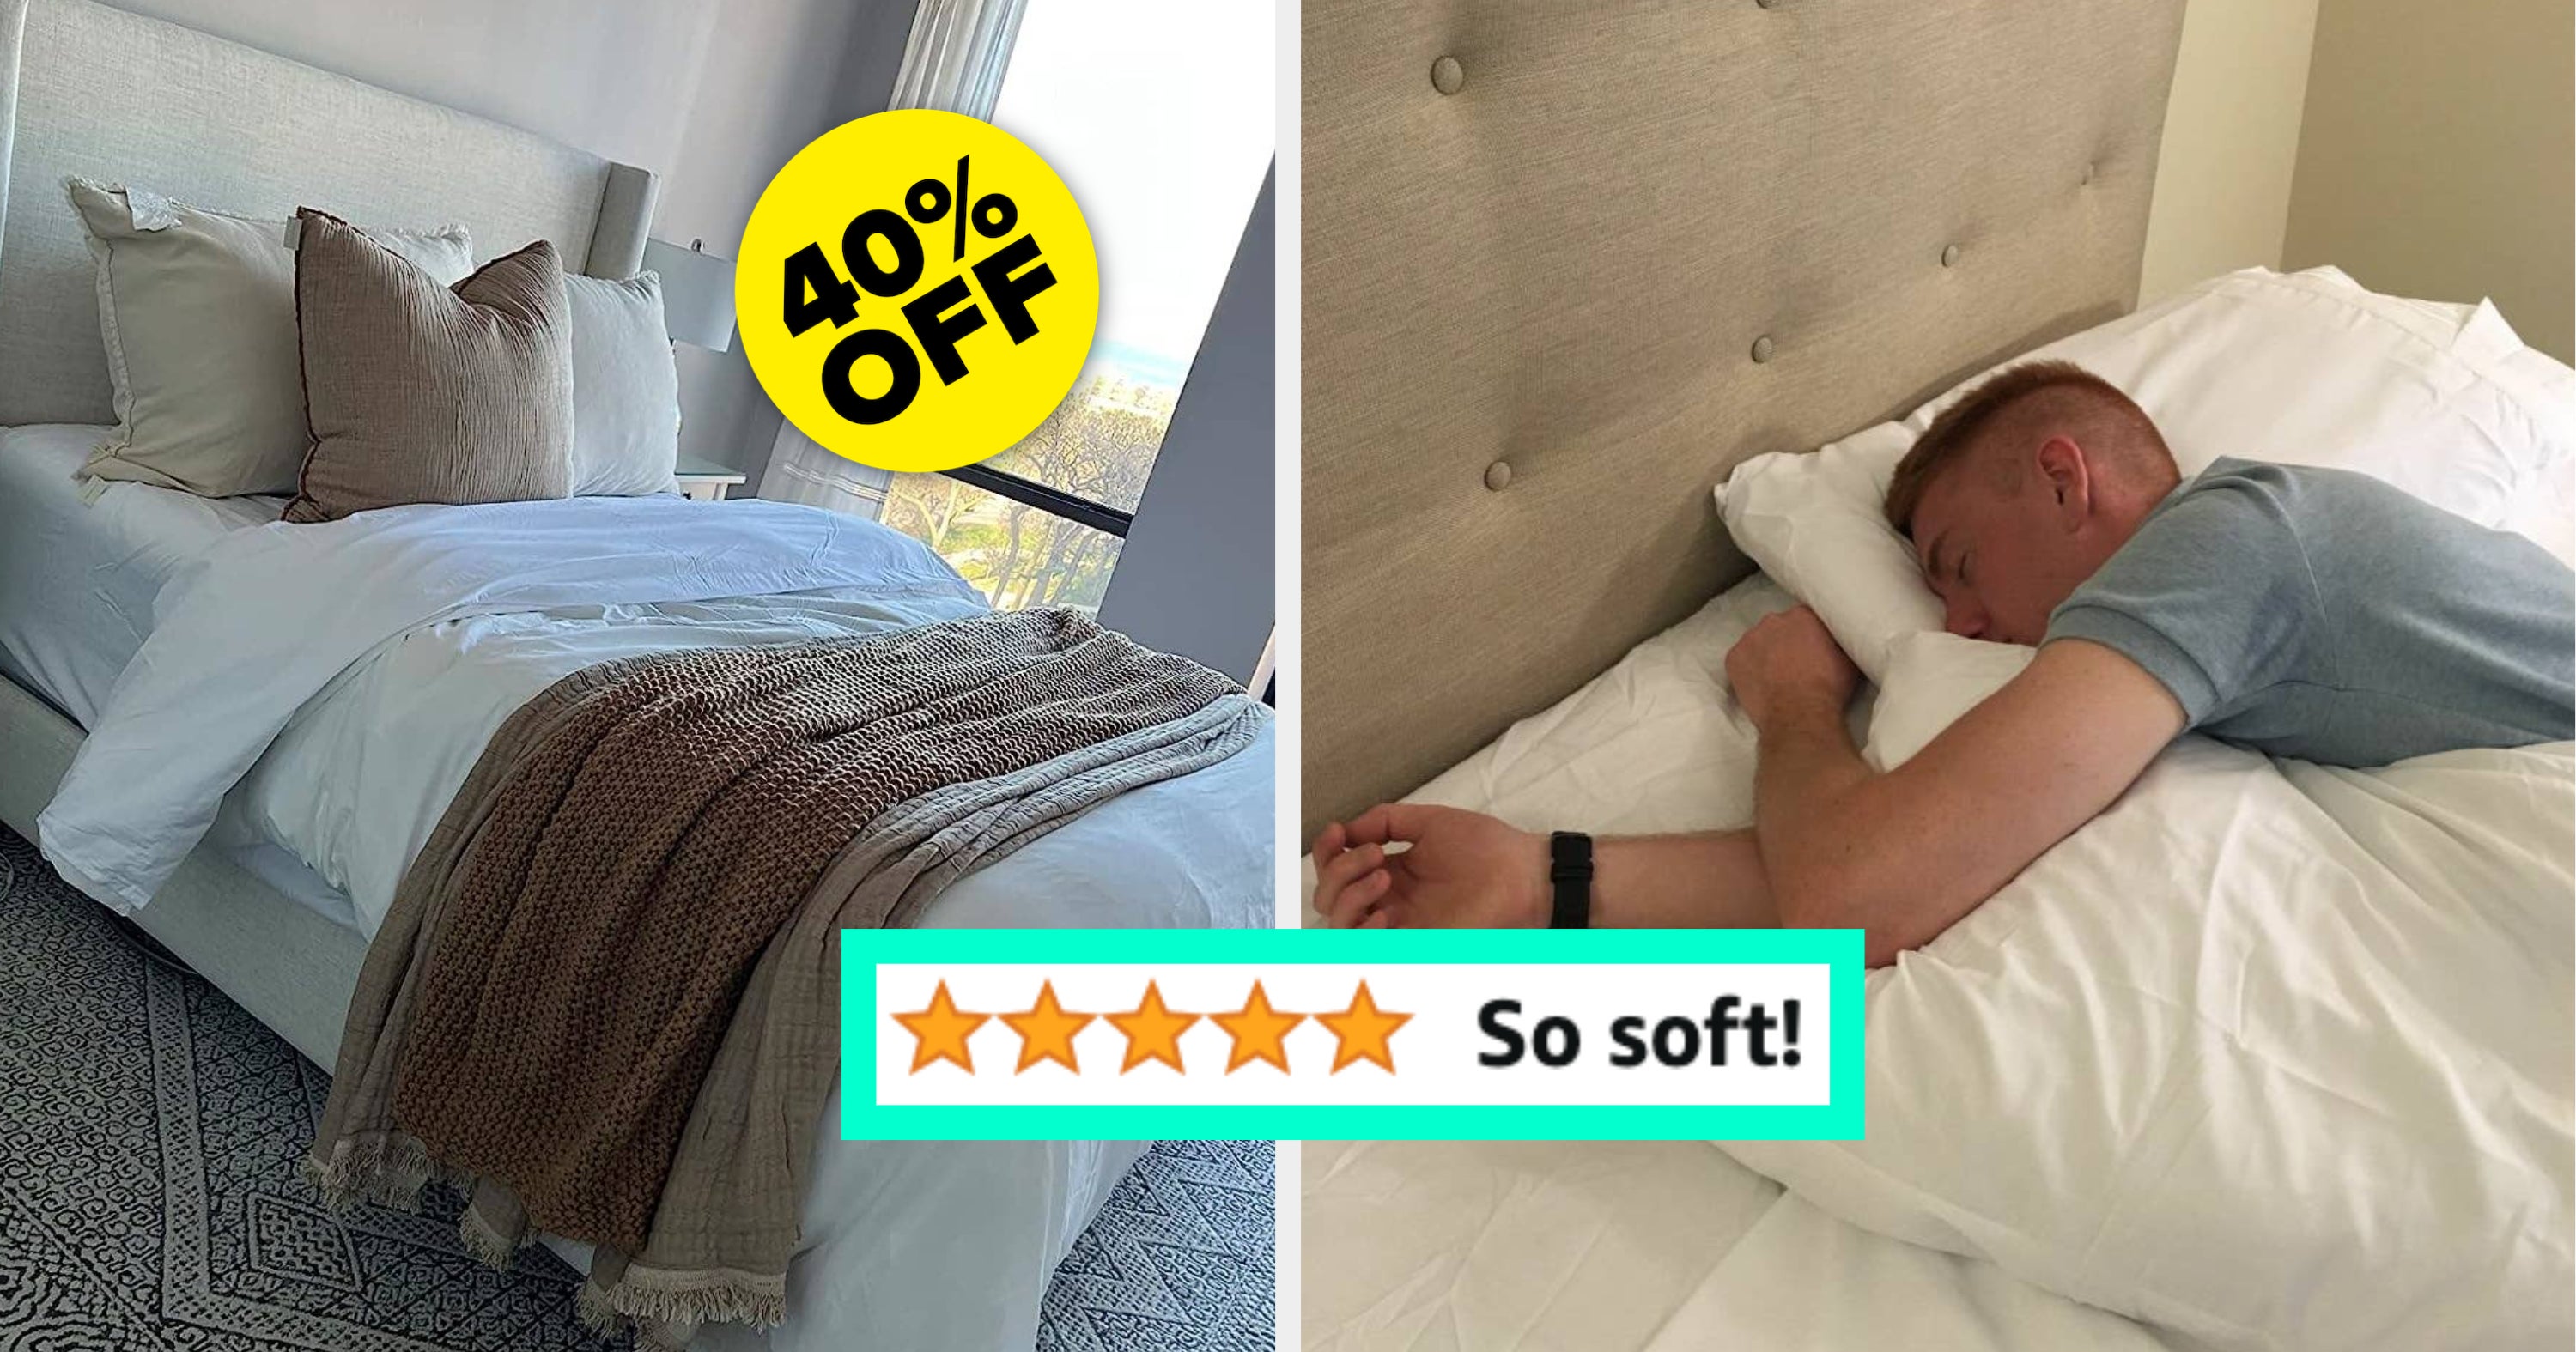 Over 250,000 people love this cooling sheet set on sale on Prime Day and this is a deal you don’t want to miss